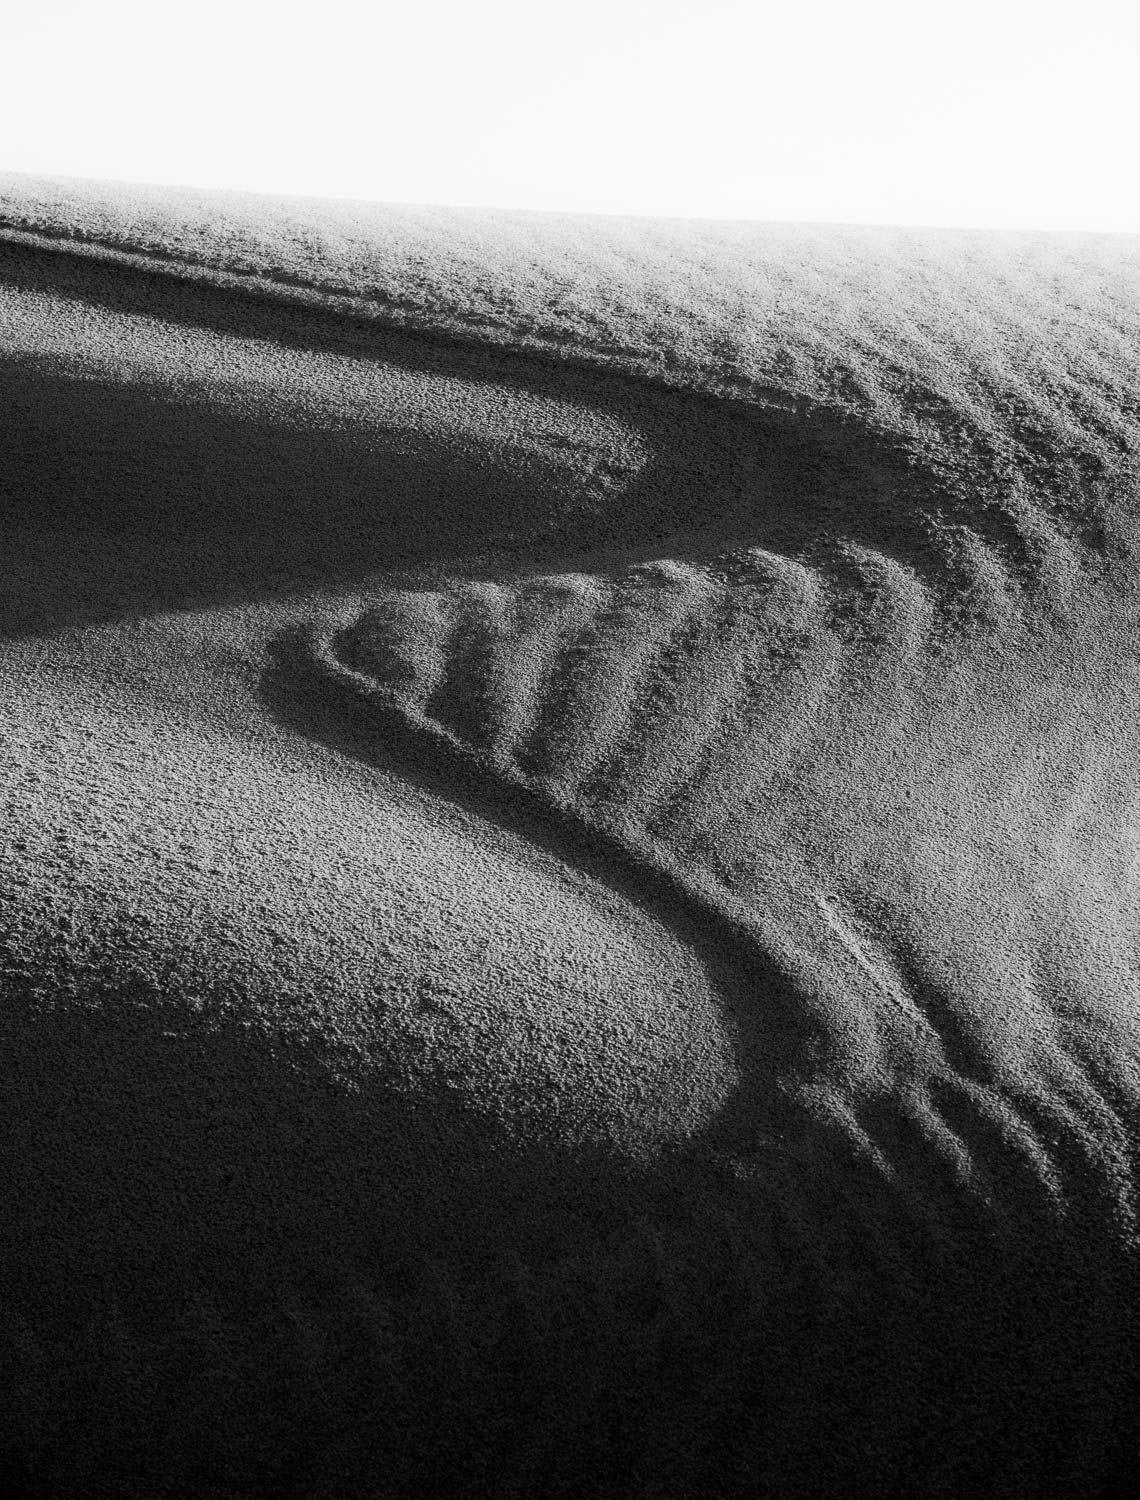 A black and white view of a desert with clean lines some and long waves of separating the plane and the curvy sand, and a dark shadow hitting partially on the picture, Eyre Peninsula #8